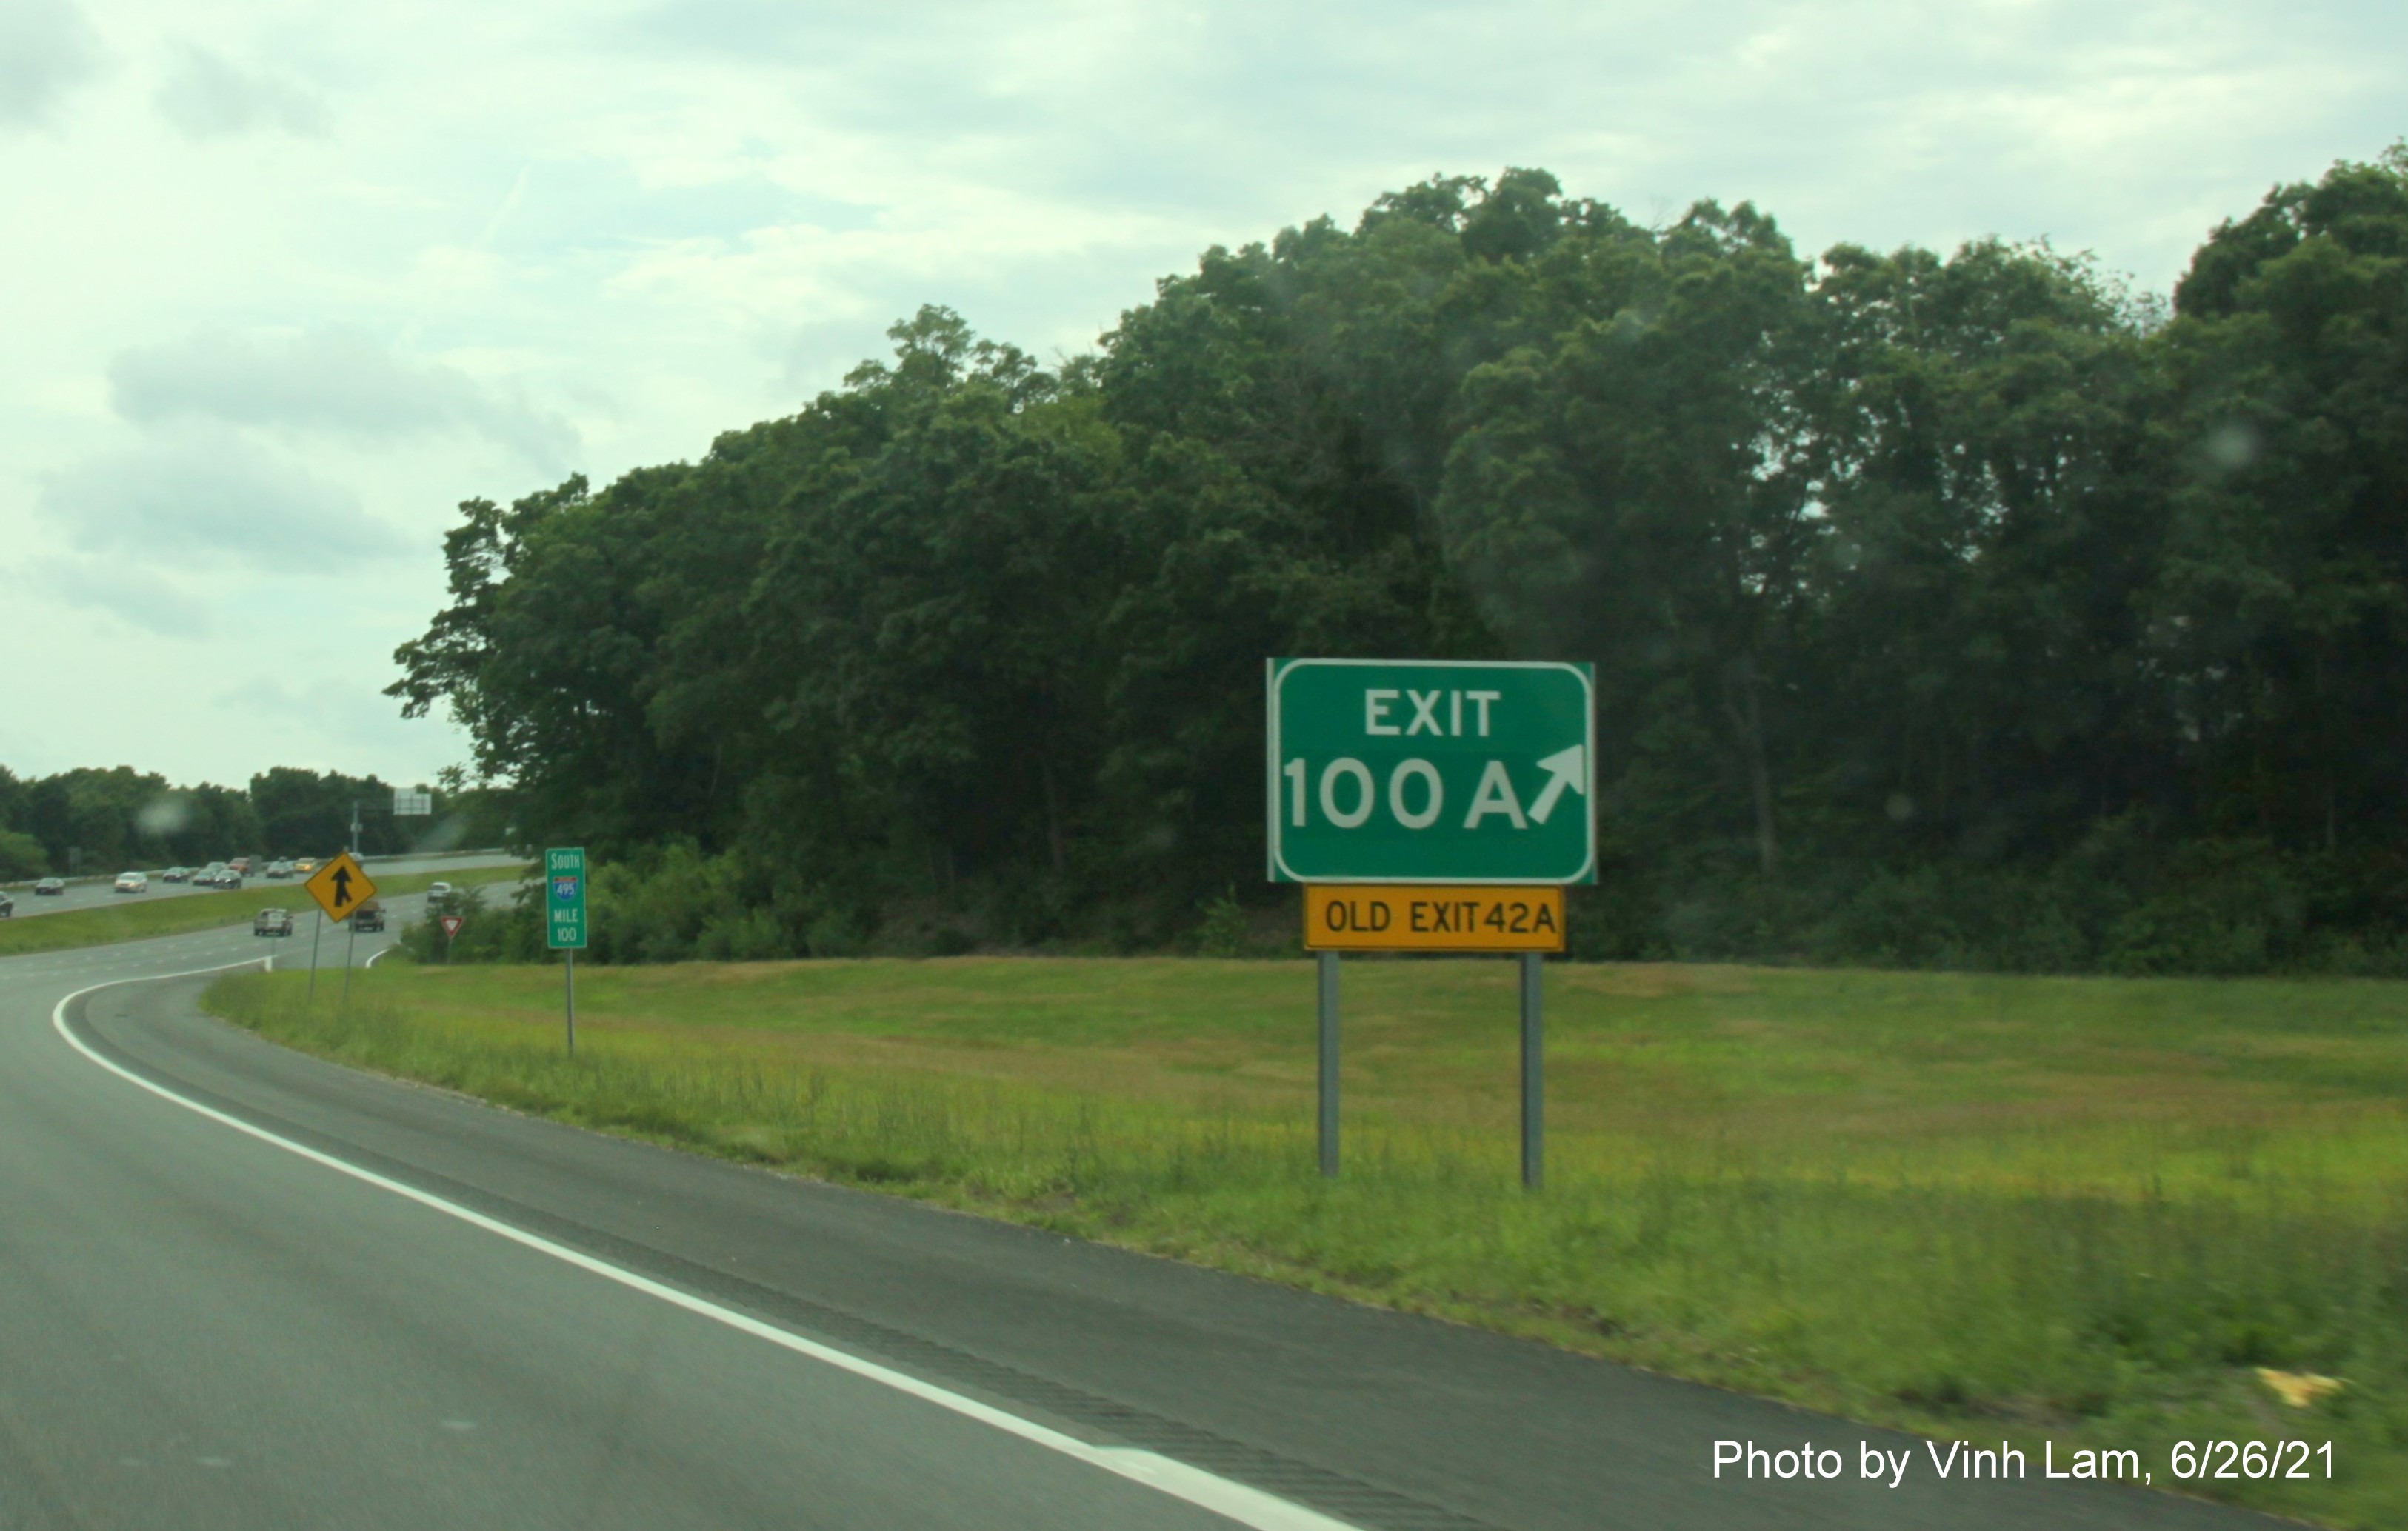 Image of gore sign for MA 114 East exit with new milepost exit number and yellow Old Exit 42A sign attached below on I-495 South in North Andover, by Vinh Lam, June 2021